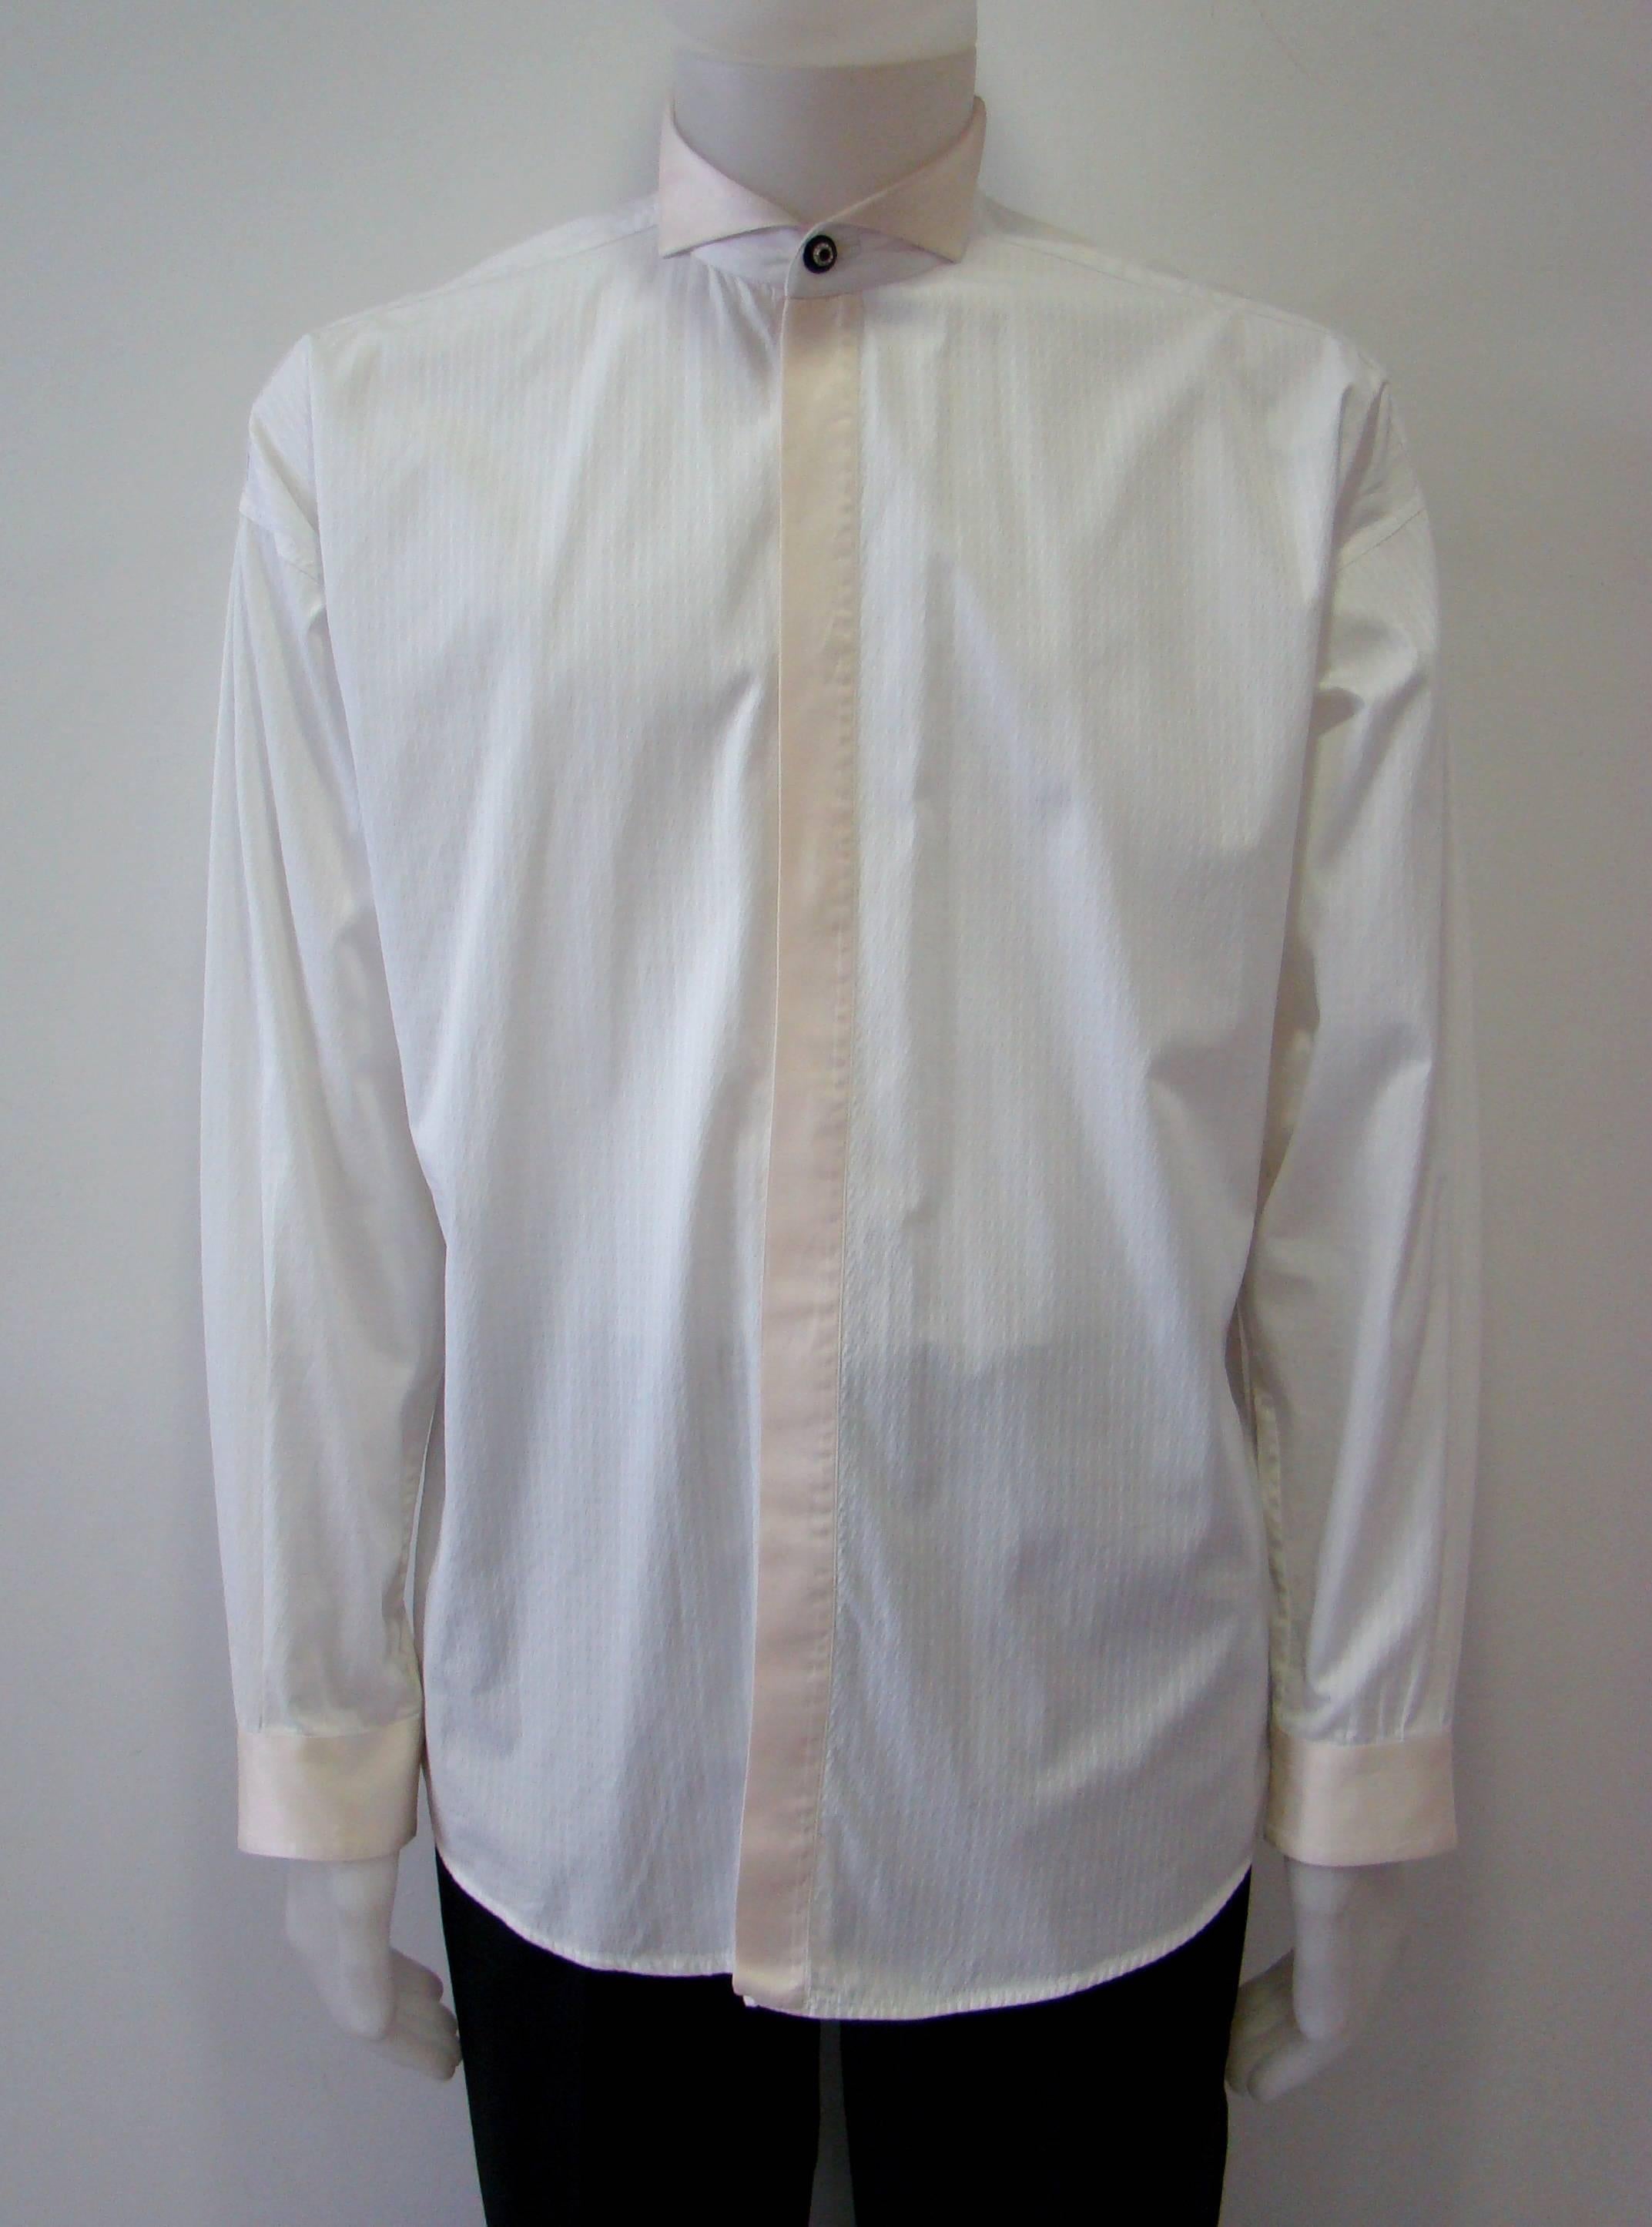 A Modernly Elegant White Shirt With A Traditional Tuxedo Collar Featuring A Front Bib, Covered Placket And Concealed Front Buttoning. An Amazing Combination Of Cotton And Silk Fabric, Detailed With Creme Satin Sheen Fabric At Collar And Cuffs. This